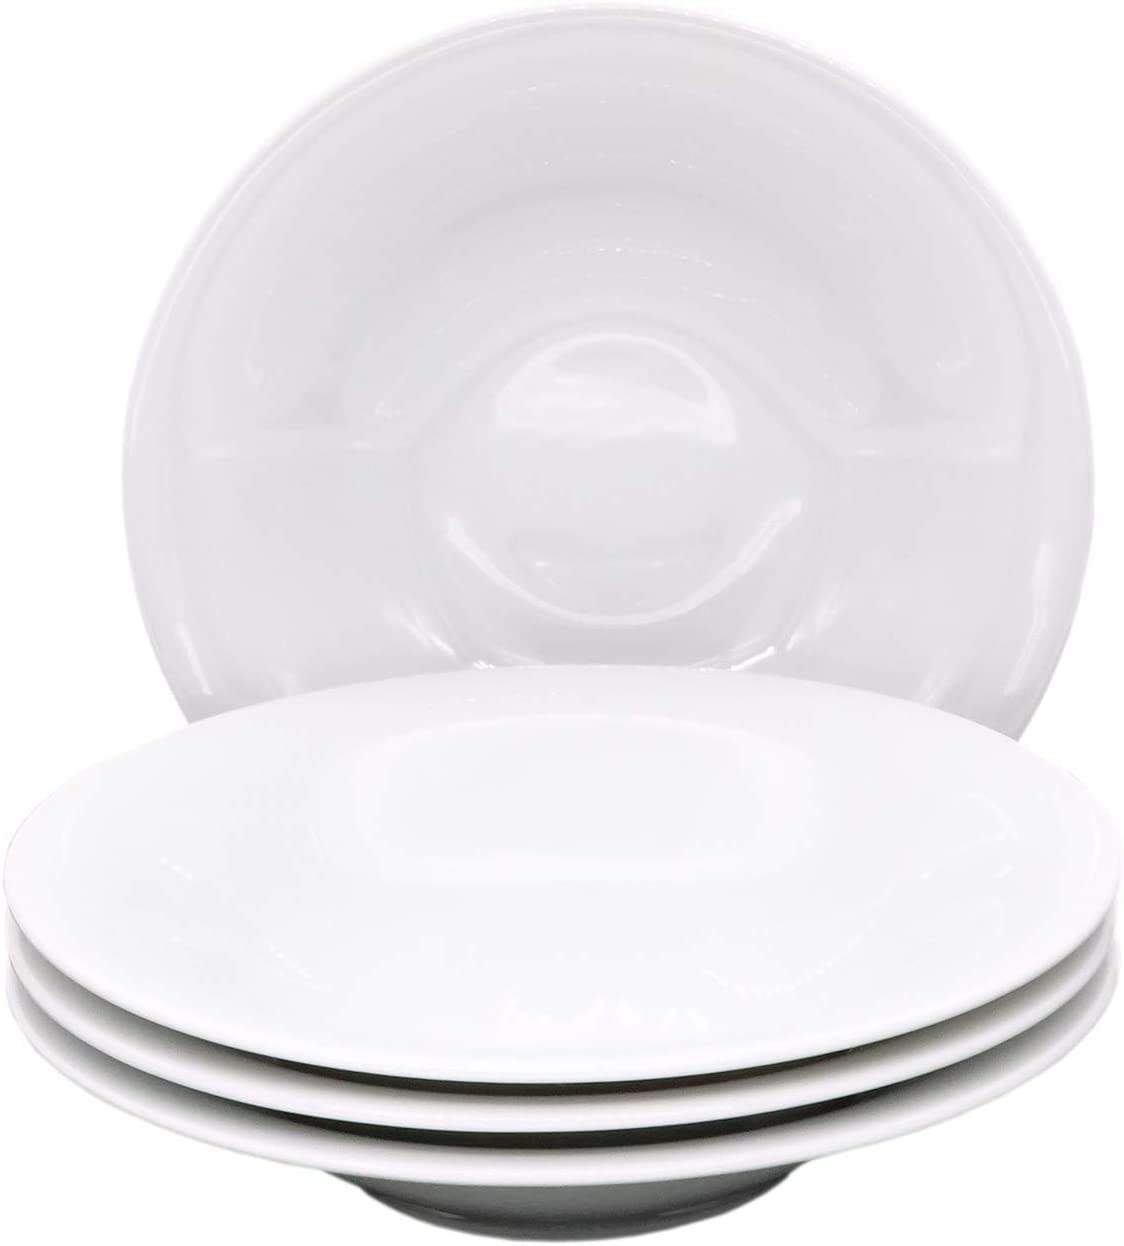 KAHLA Update Pasta Plate Set in White, Set of 4